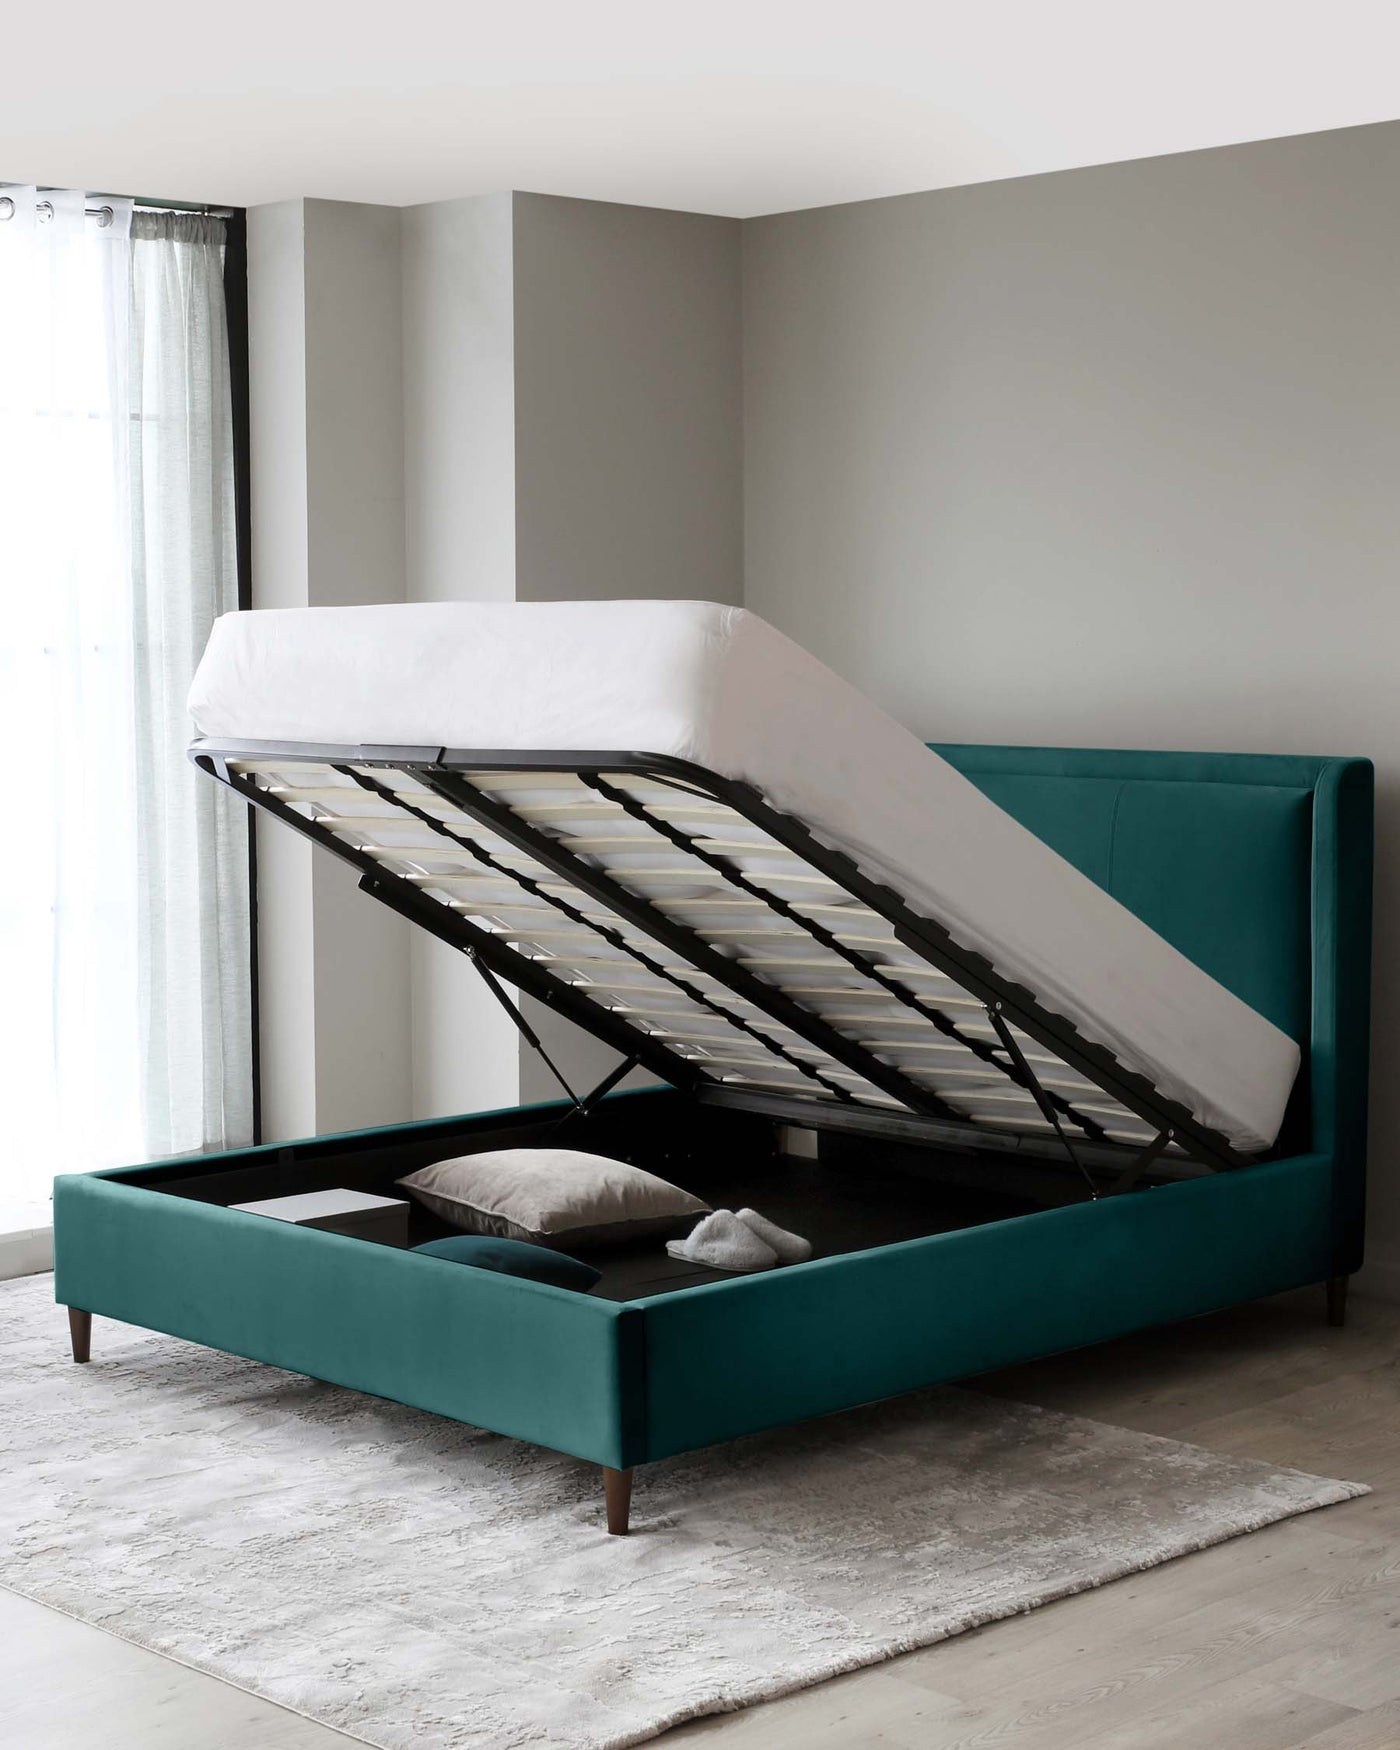 A modern teal upholstered storage bed with a lifted mattress base revealing a spacious storage compartment underneath, set against a neutral backdrop with a soft grey area rug on the floor.